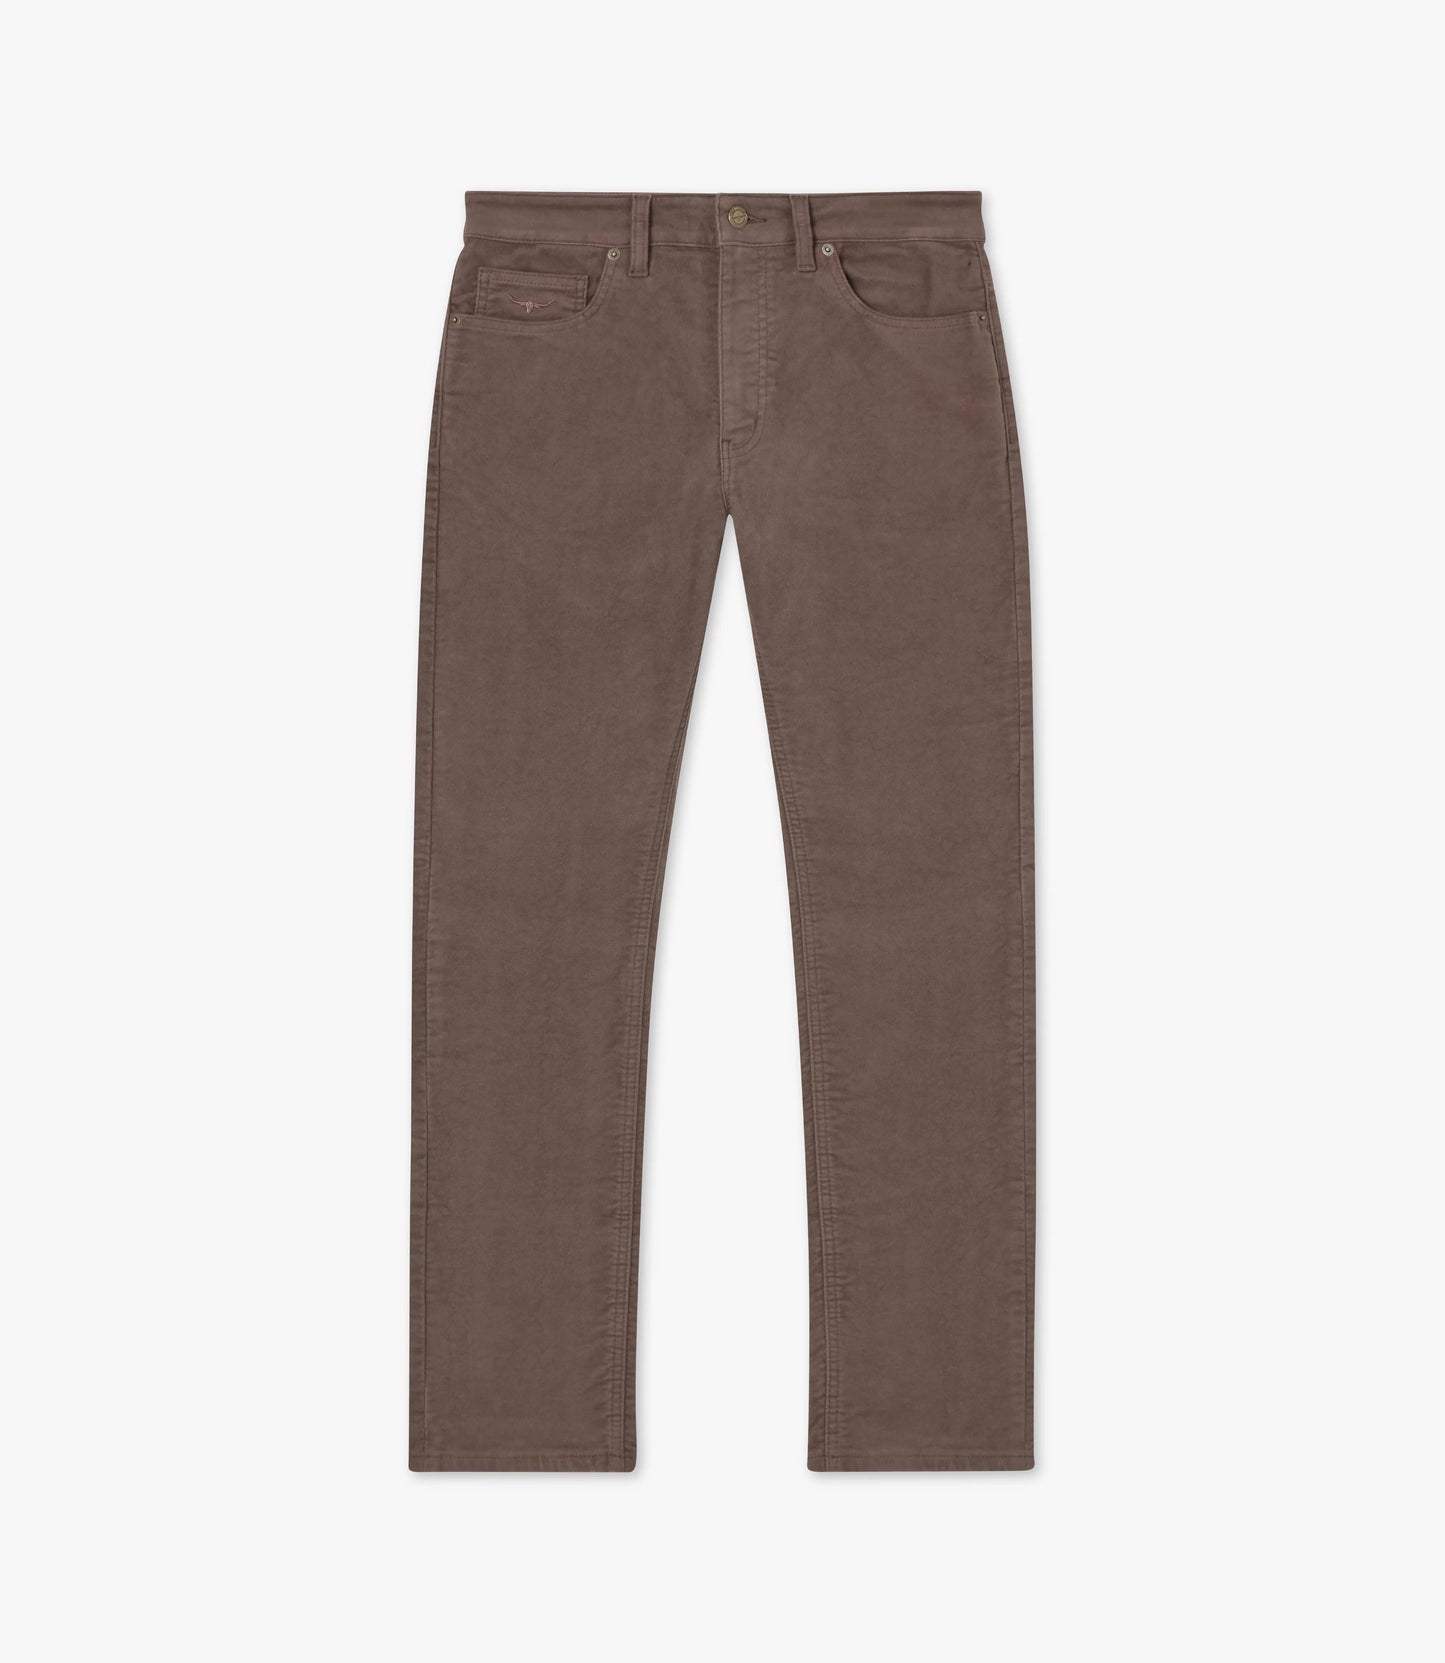 Taupe Ramco Jeans, R.M.Williams Jeans